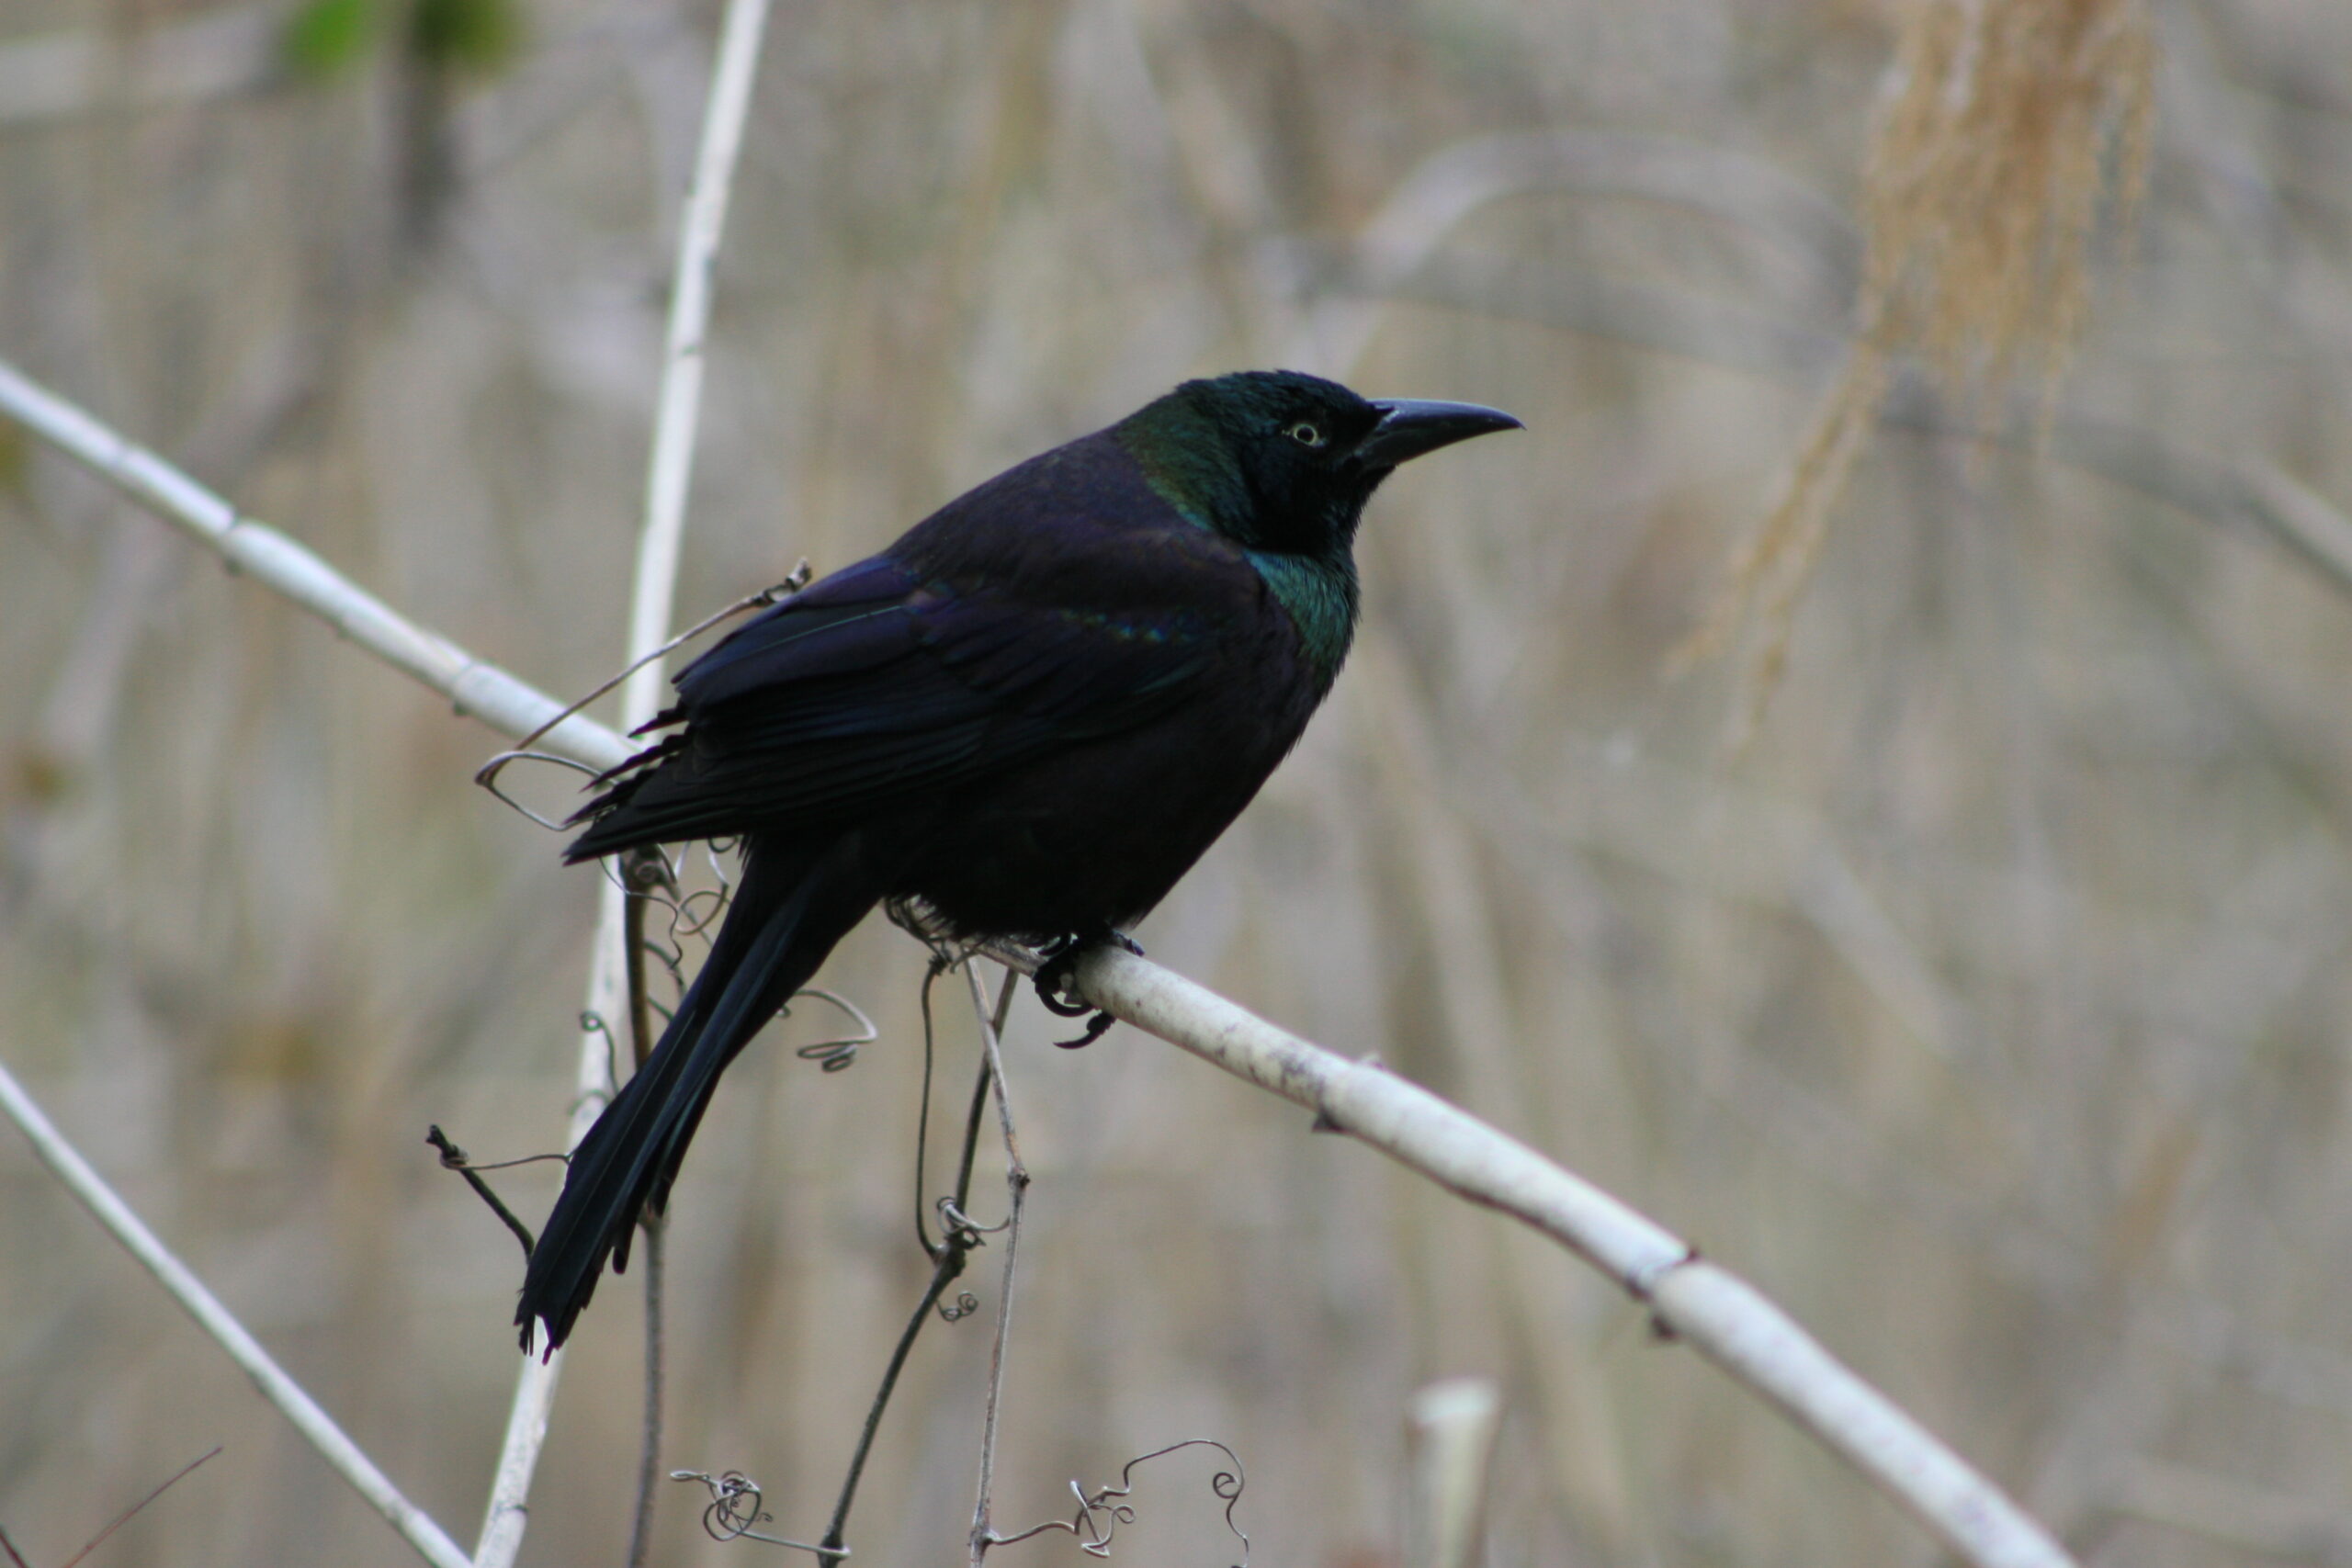 An iridescent black bird sitting on a small white branch